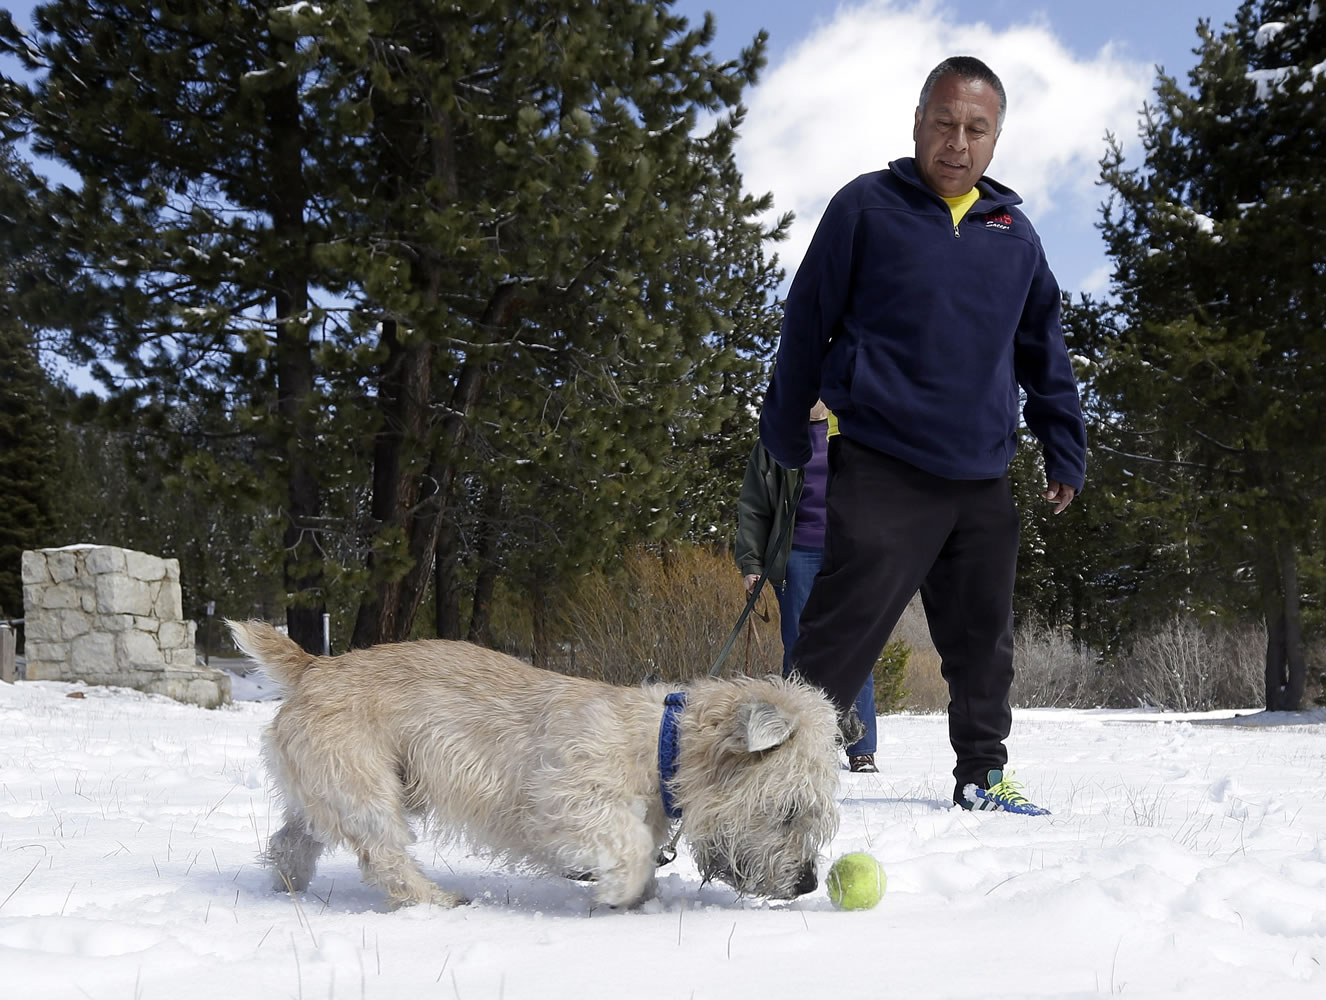 Sullivan, a Glen of Imaal Terrier, pushes a tennis ball next to his owner, Armando Lopez, near Echo Summit, Calif., on Tuesday.